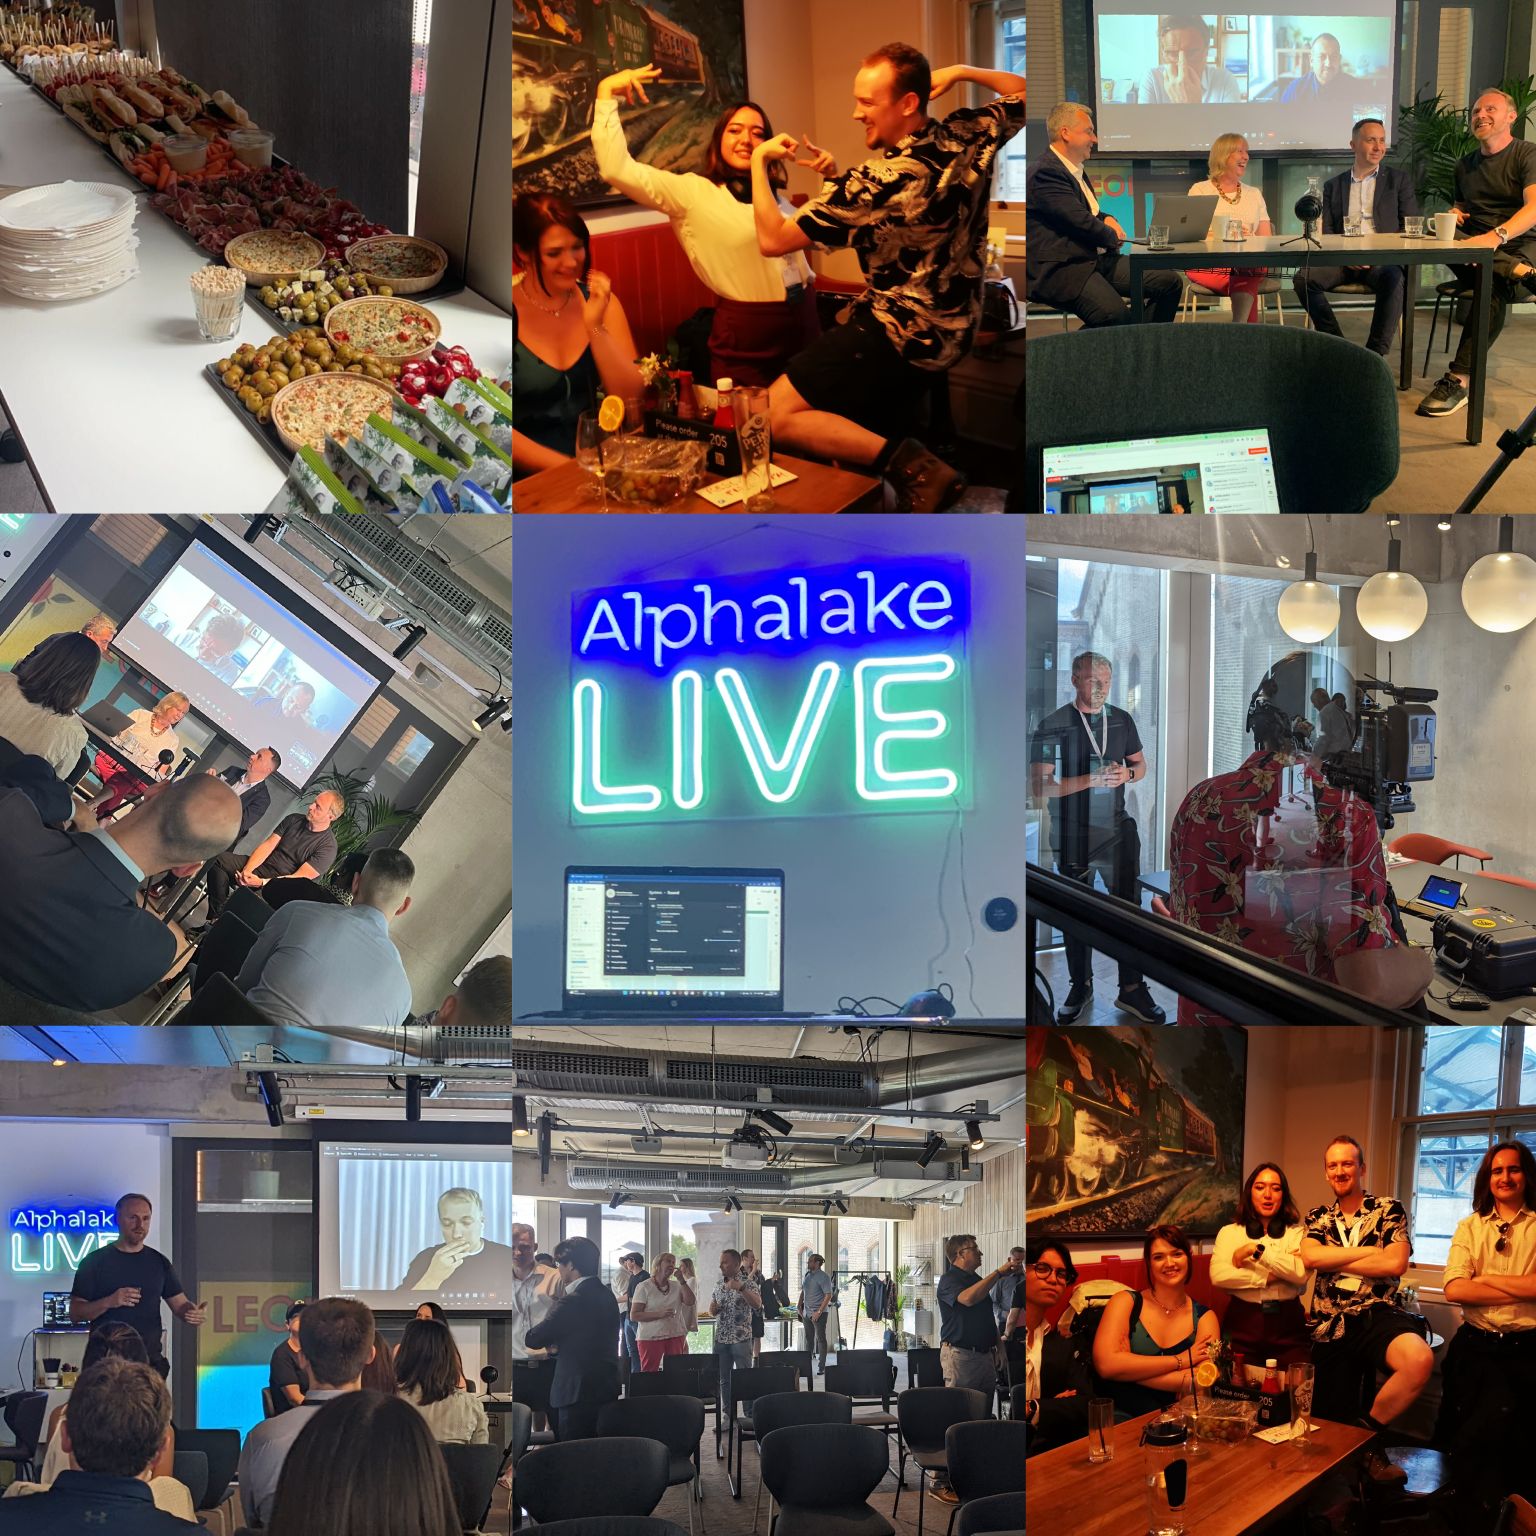 Alphalake Live London: A Feast of Information on Intelligent Automation